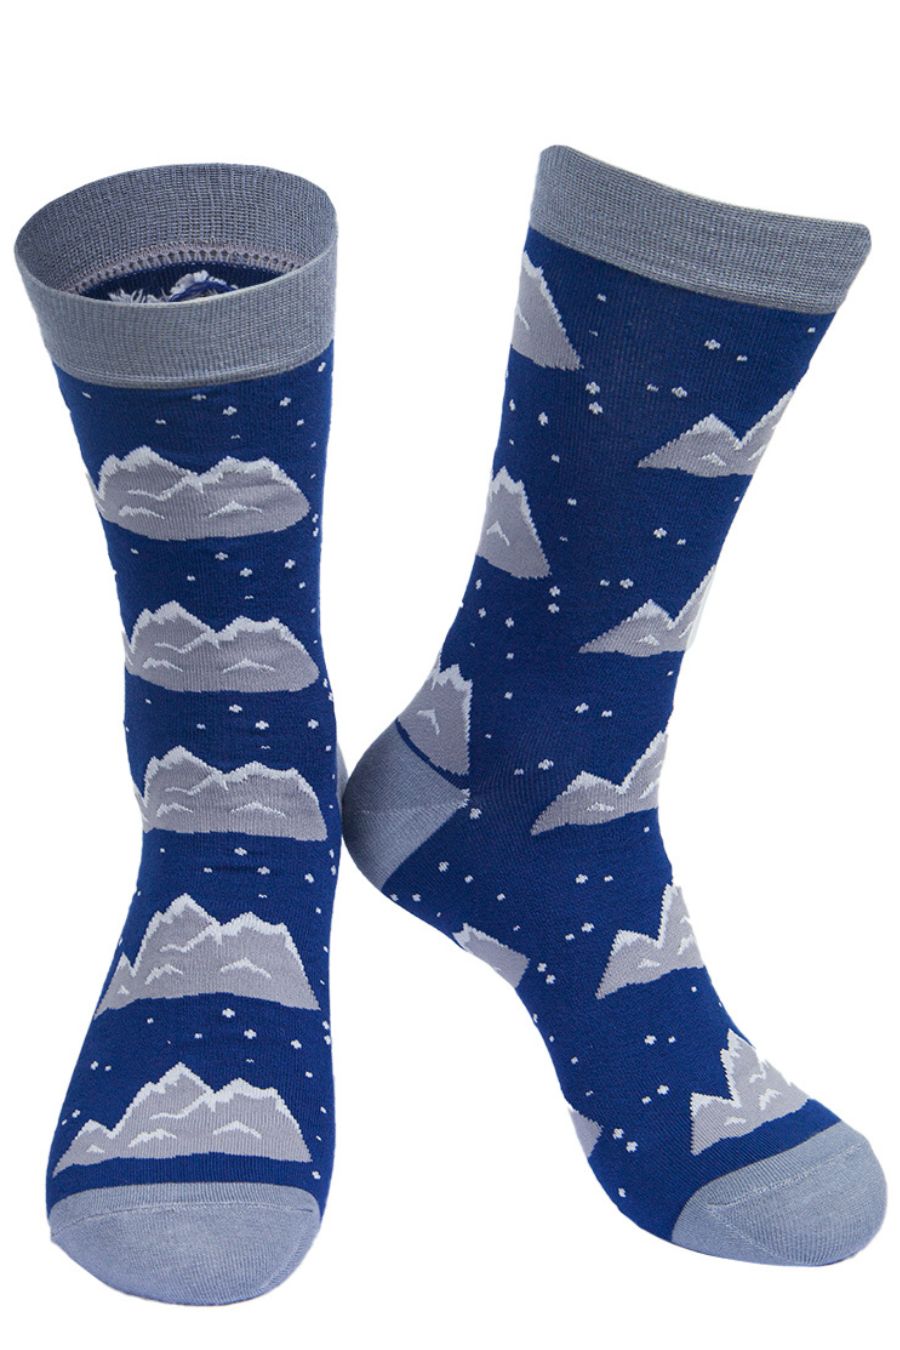 blue and grey bamboo dress socks with a snowy mountain and snowflake pattern design